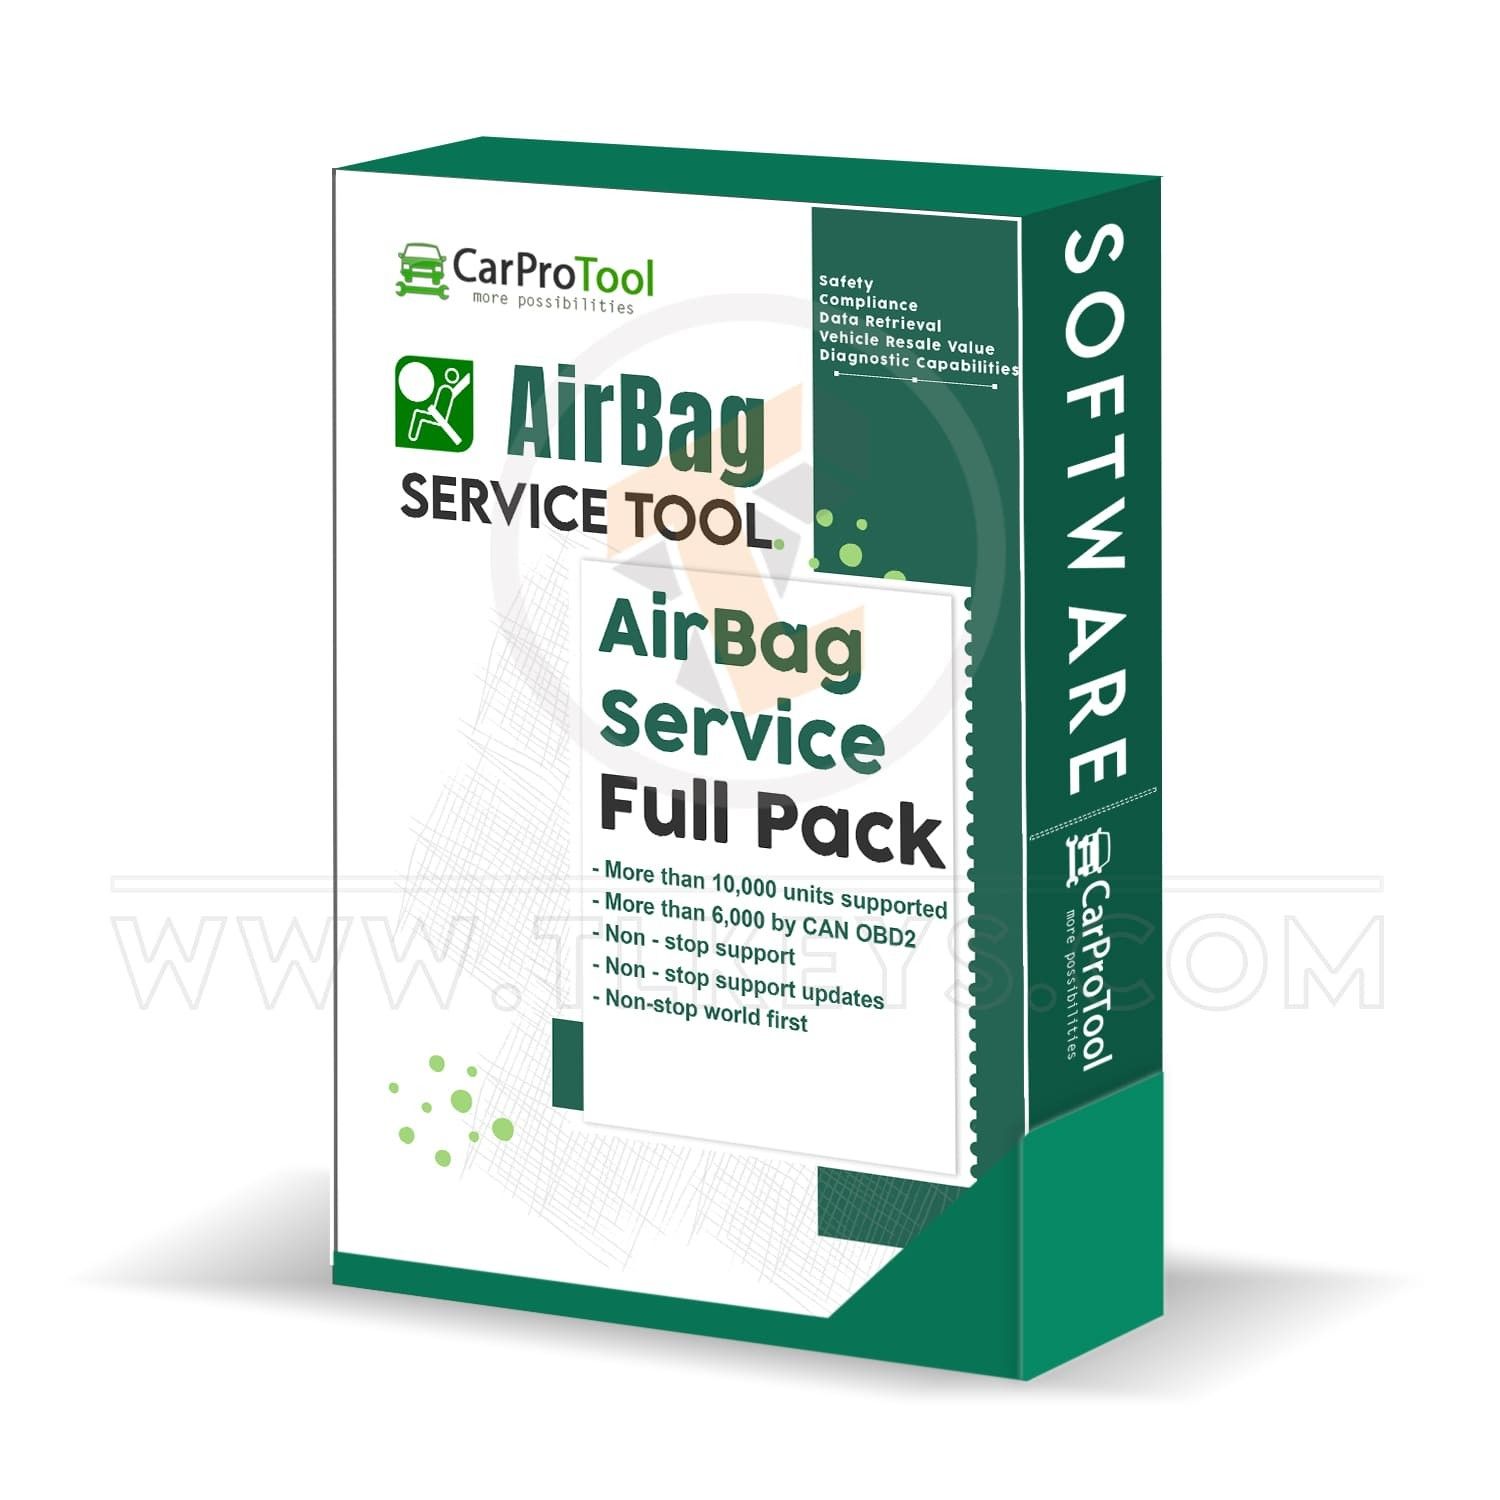 AIRBAG SERVICE FULL PACK airbag